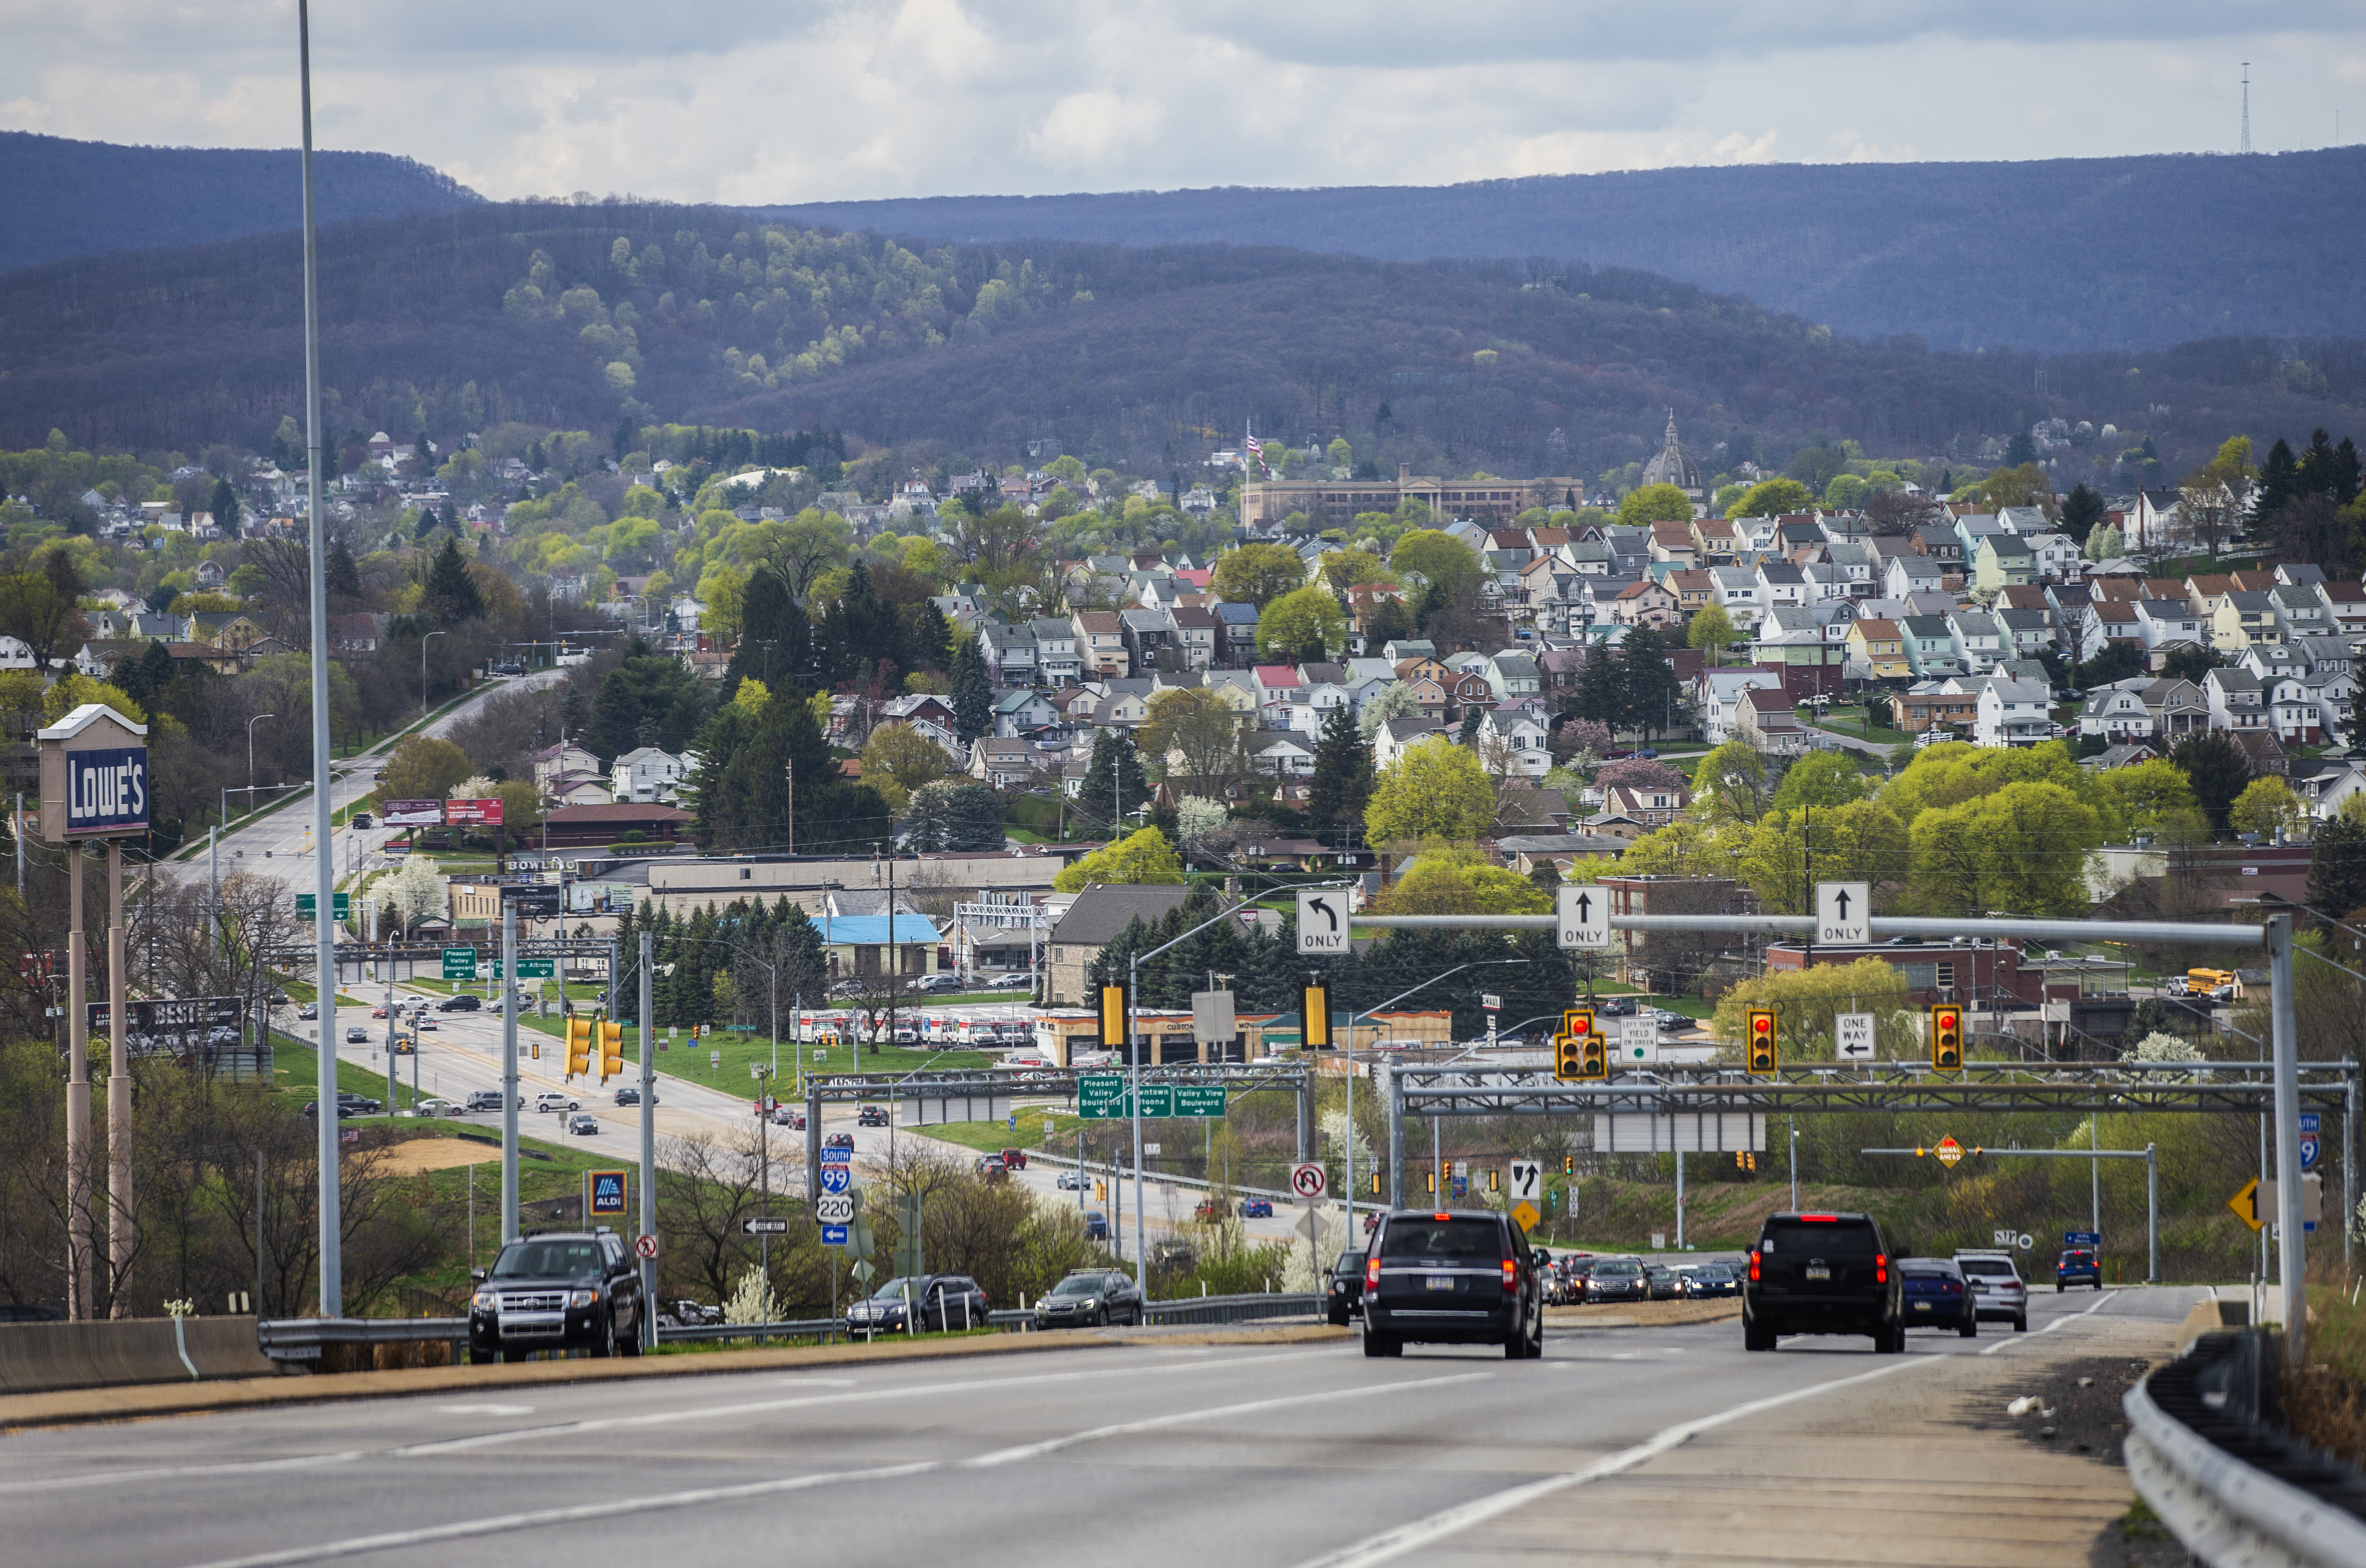 Scenes from Altoona, Pa. April 14, 2021 Sean Simmers |ssimmers@pennlive.com